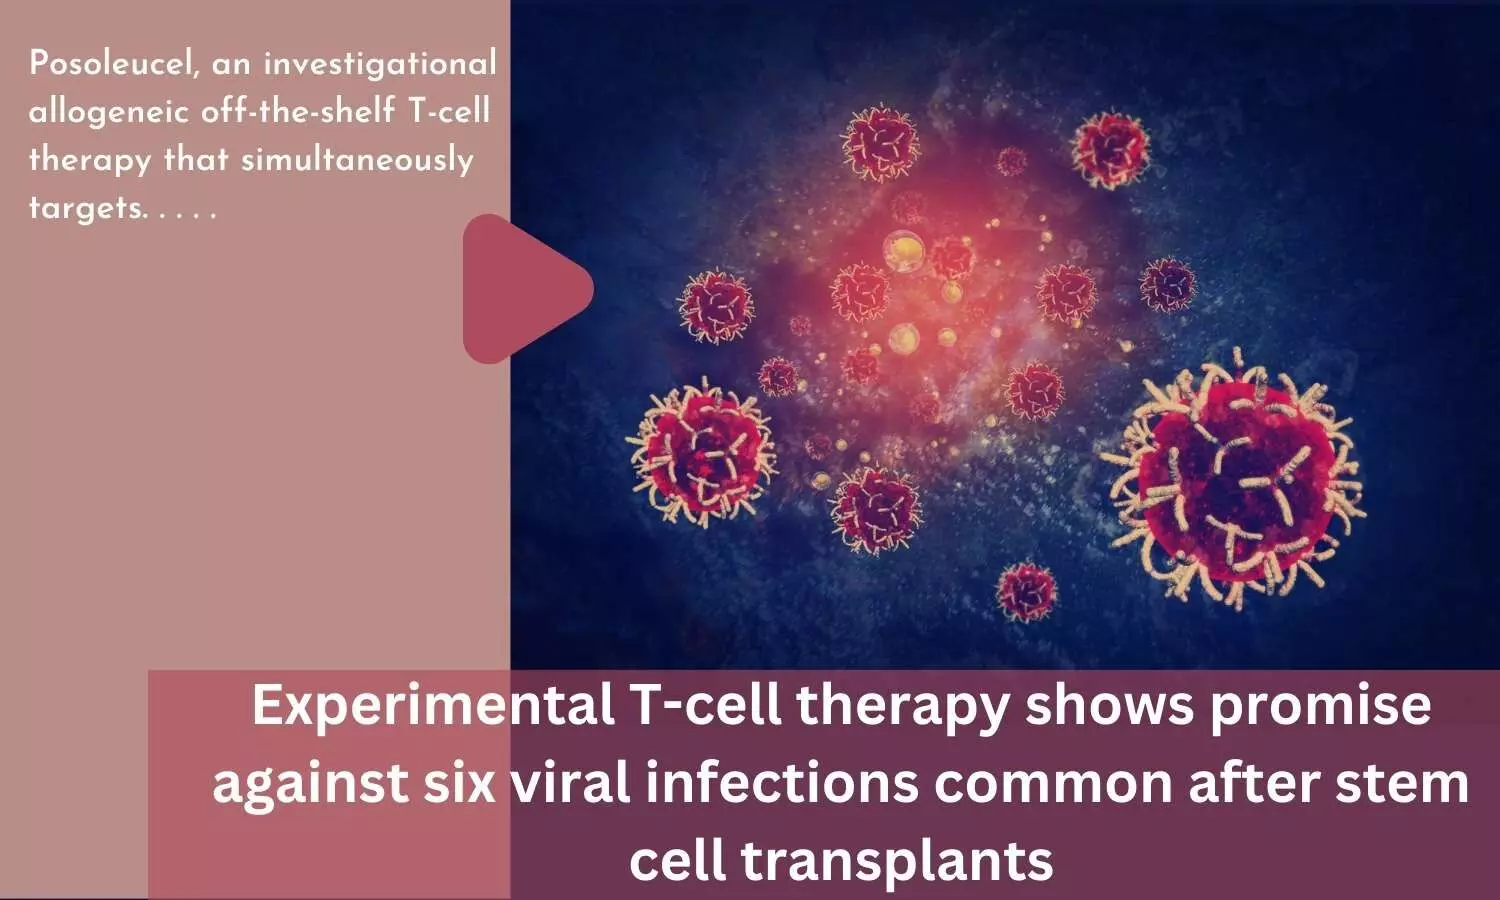 Experimental T-cell therapy shows promise against six viral infections common after stem cell transplants